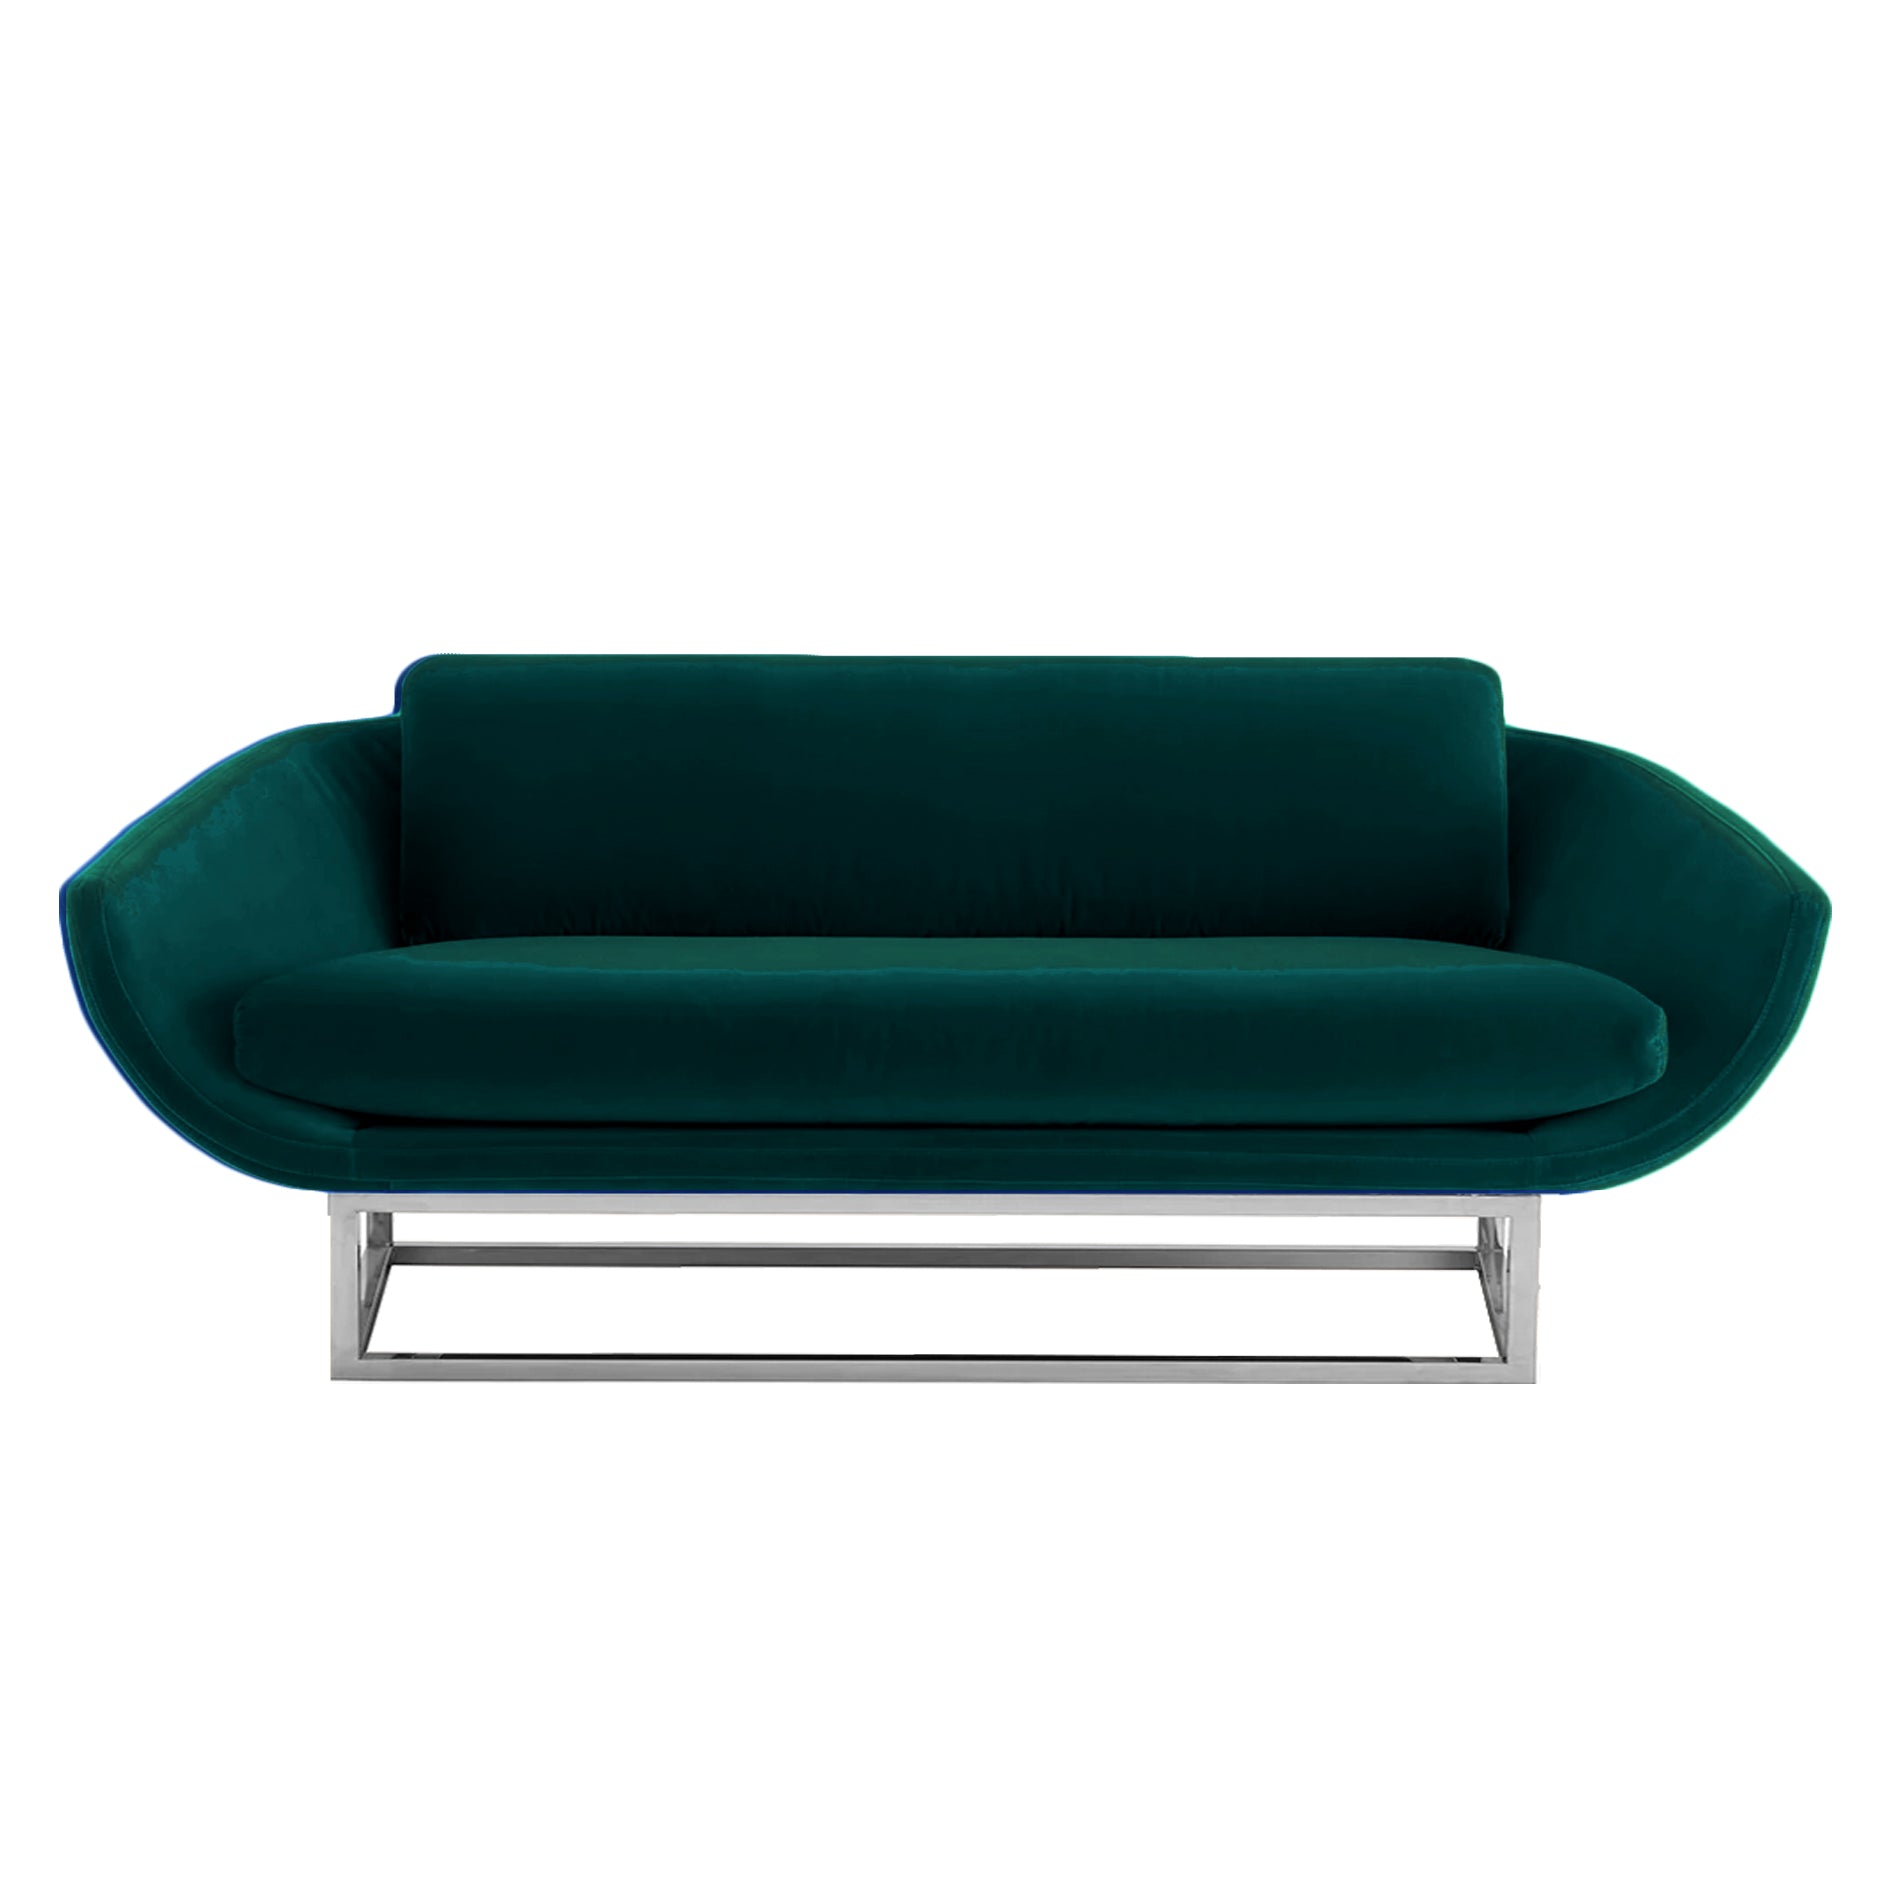 contemporary upholstery sofa in green with metal base, perfect for luxurious event seating.